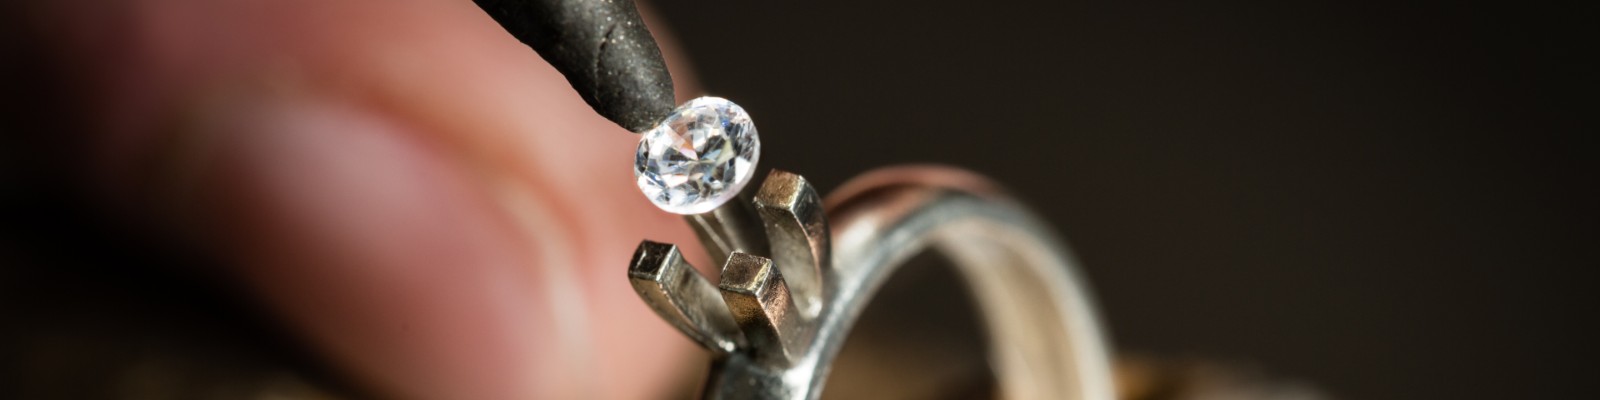 Jewelry Repair Services at BARONS Jewelers